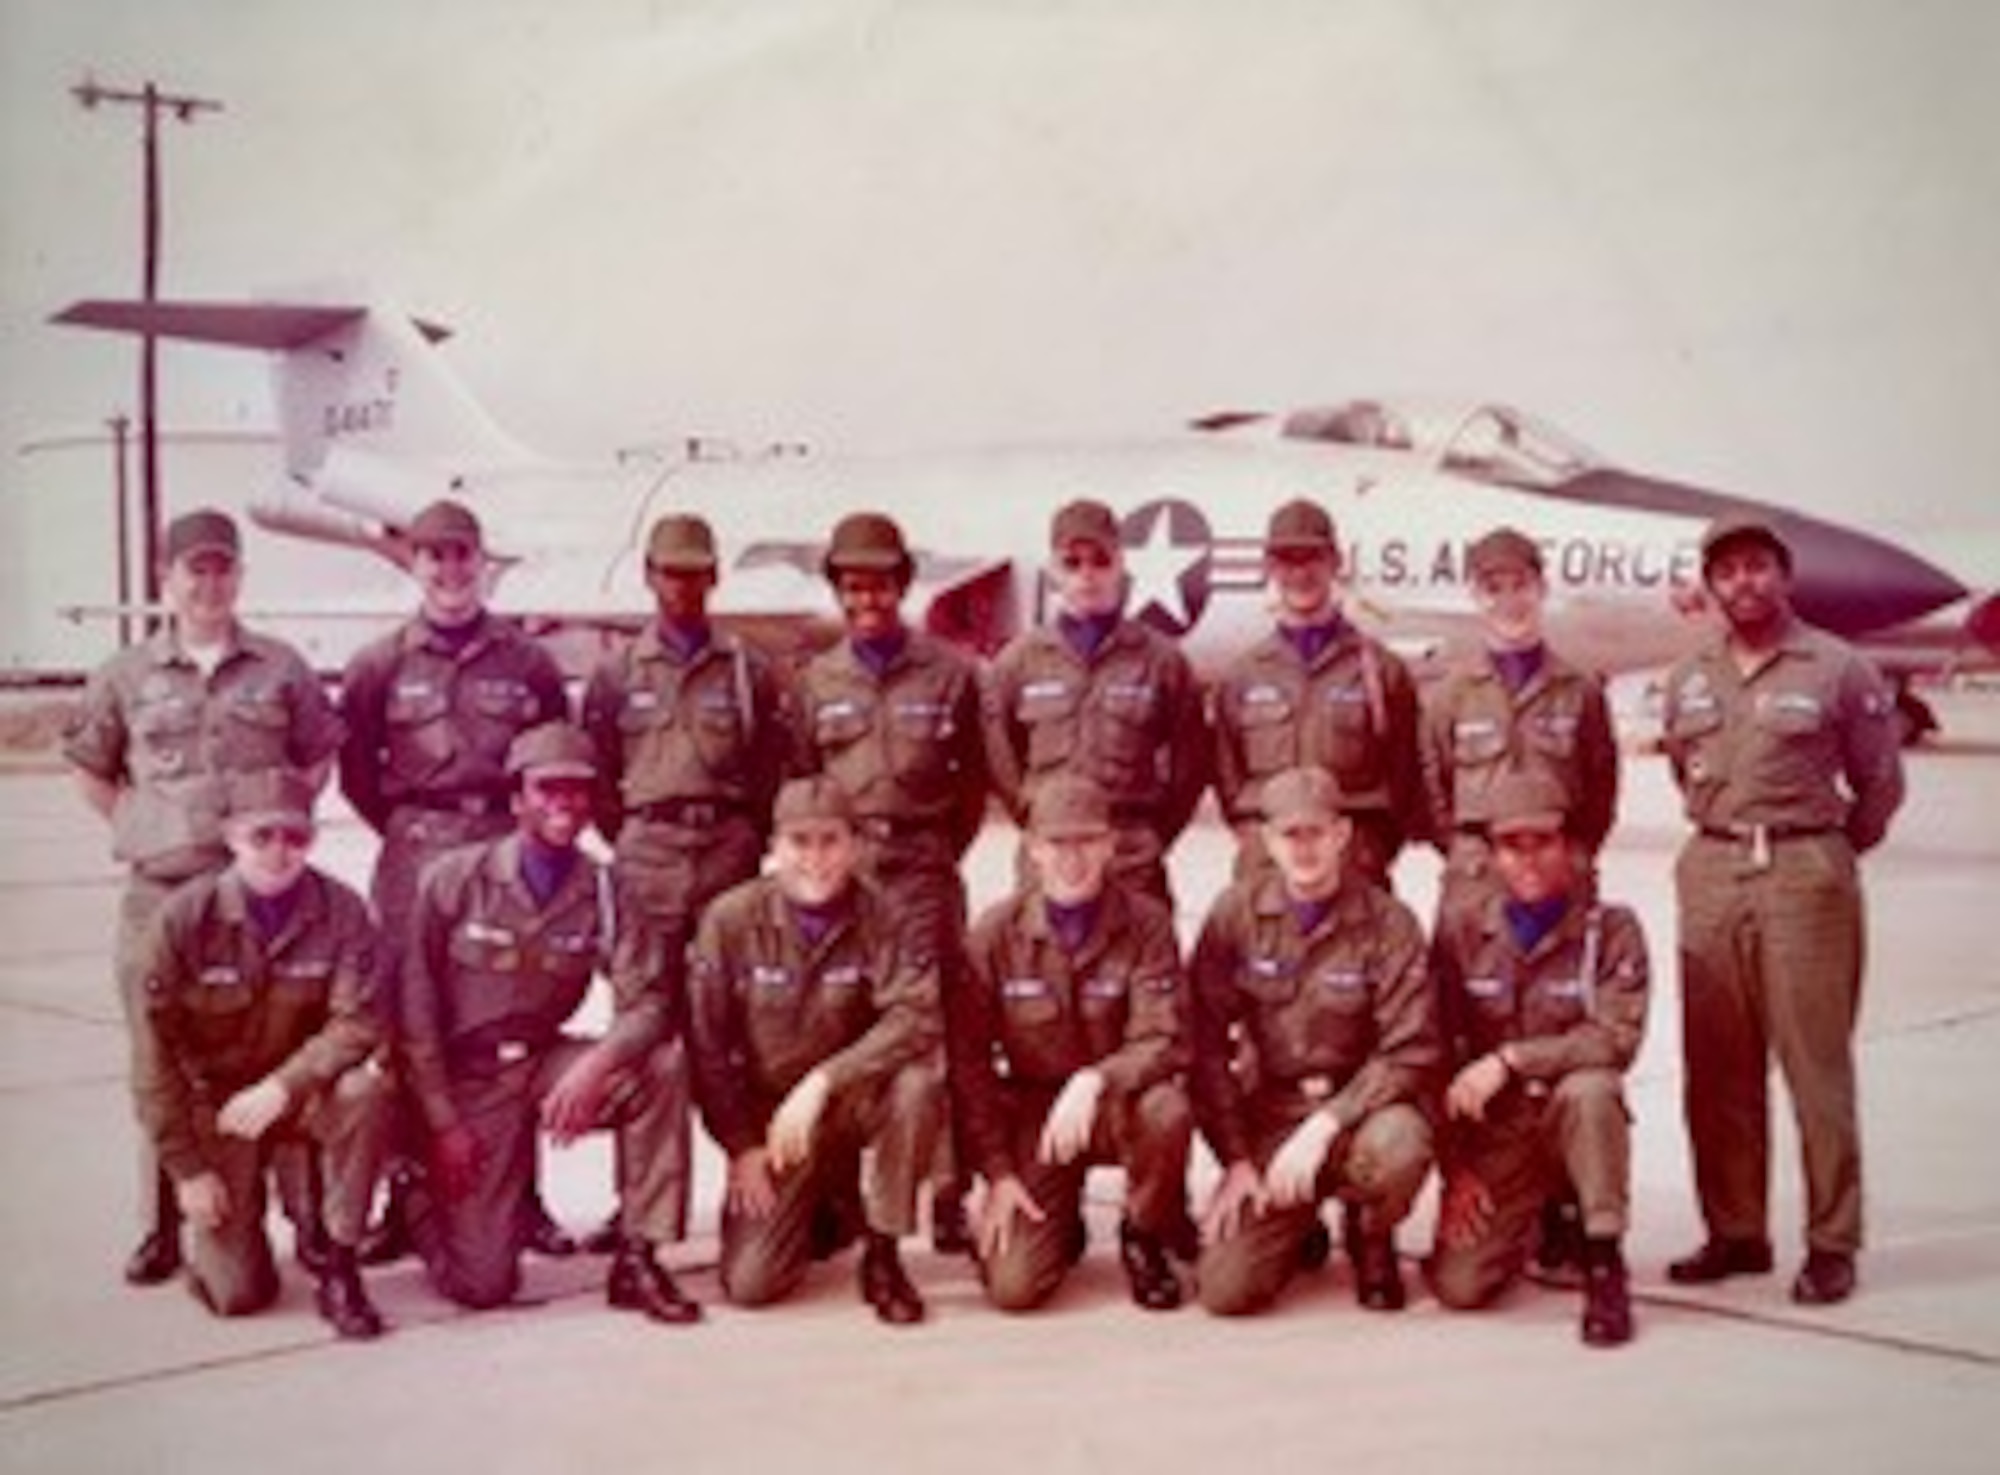 Former Airman Galen Williams, top row, center left, poses for a photo in front of a F-101 Voodoo after graduating technical training at Sheppard Air Force Base, Texas, 1973. Williams retired from the Air Force as a master sergeant in 1995 and went on to serve as the Safety director at Hanscom Air Force Base, Mass. Williams will retire Feb. 27 after 46 combined years of military and federal service. (Courtesy Photo).